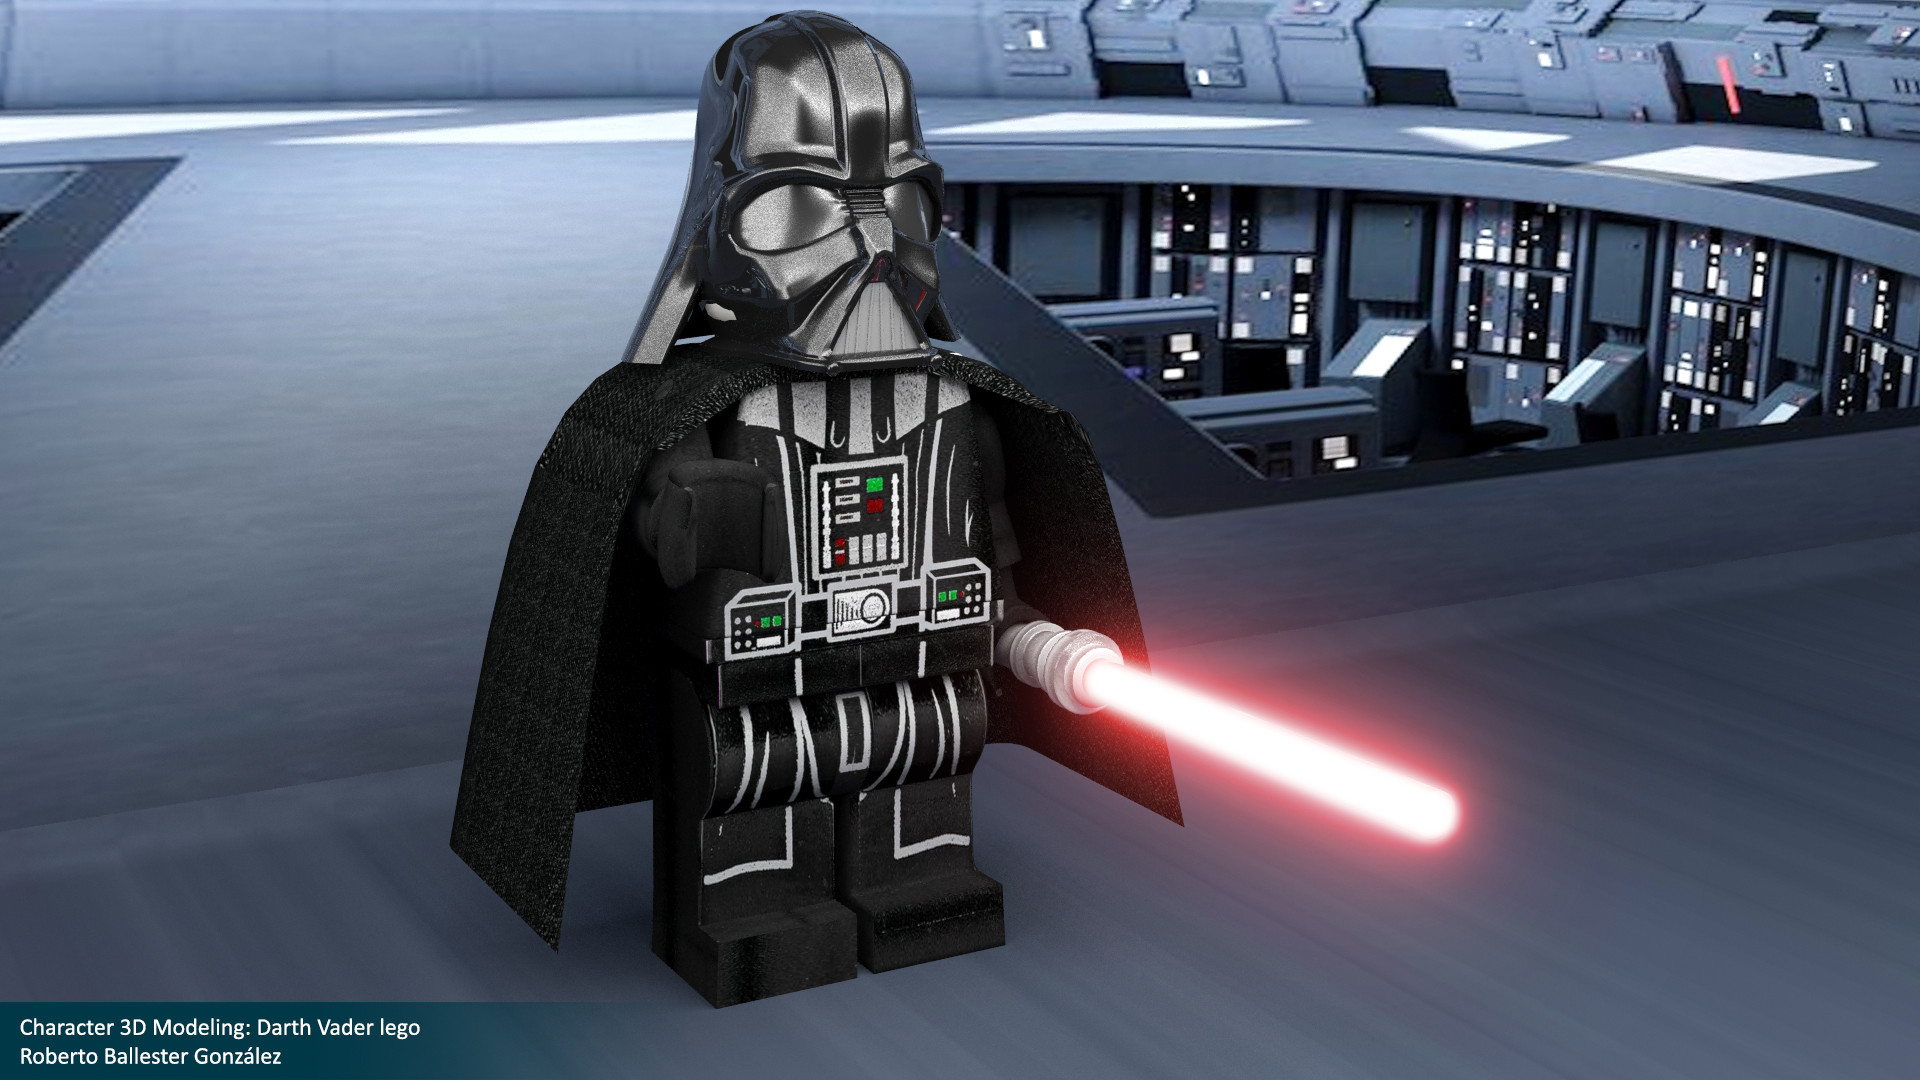 Lego Darth Vader modeled with 3D Studio Max and textured.